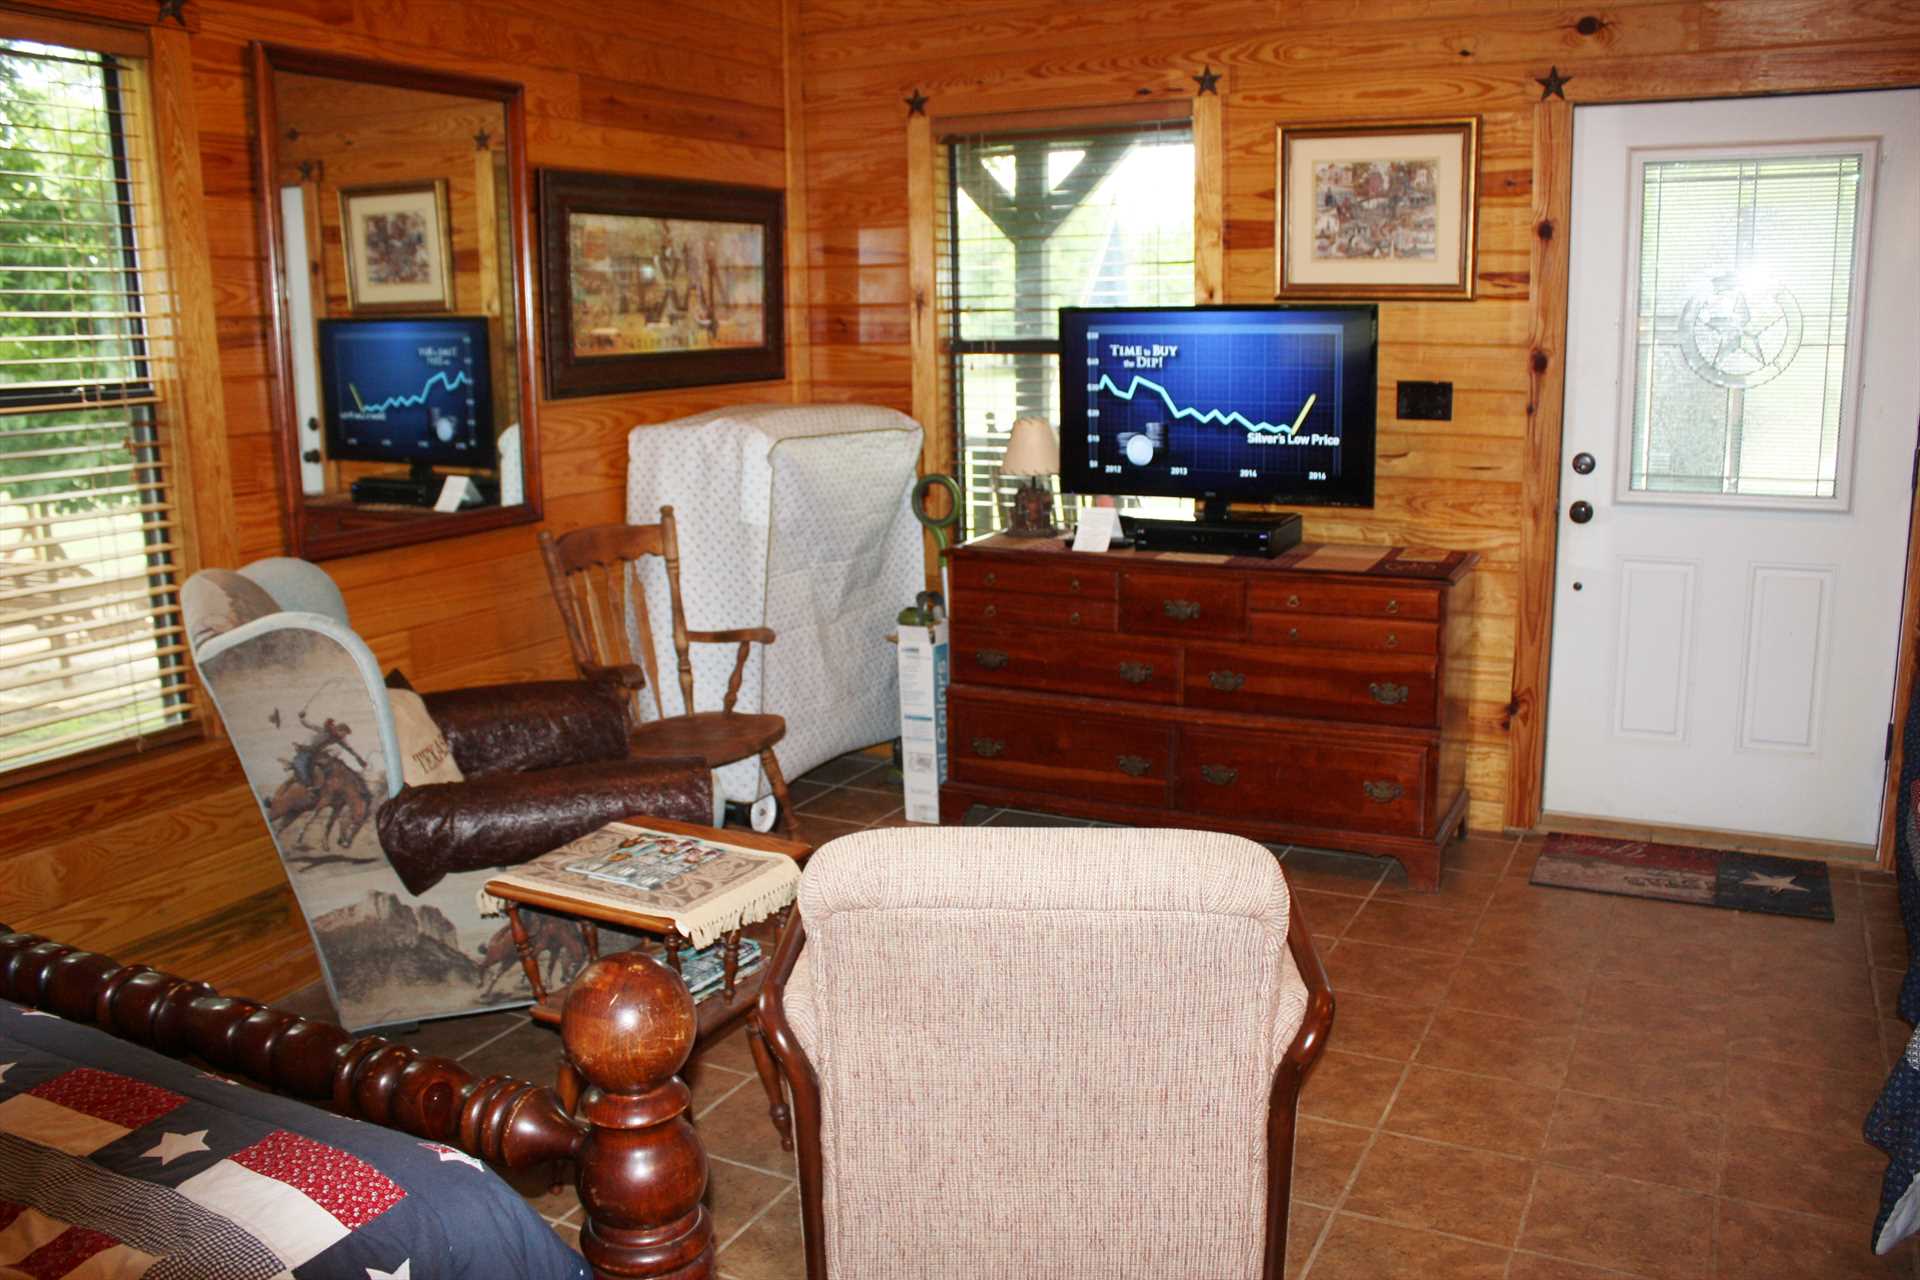                                                 Matching woodwork and flooring give the cabin a warm glow, which is also equipped with satellite TV, wireless Internet, and super-comfy AC and heating.